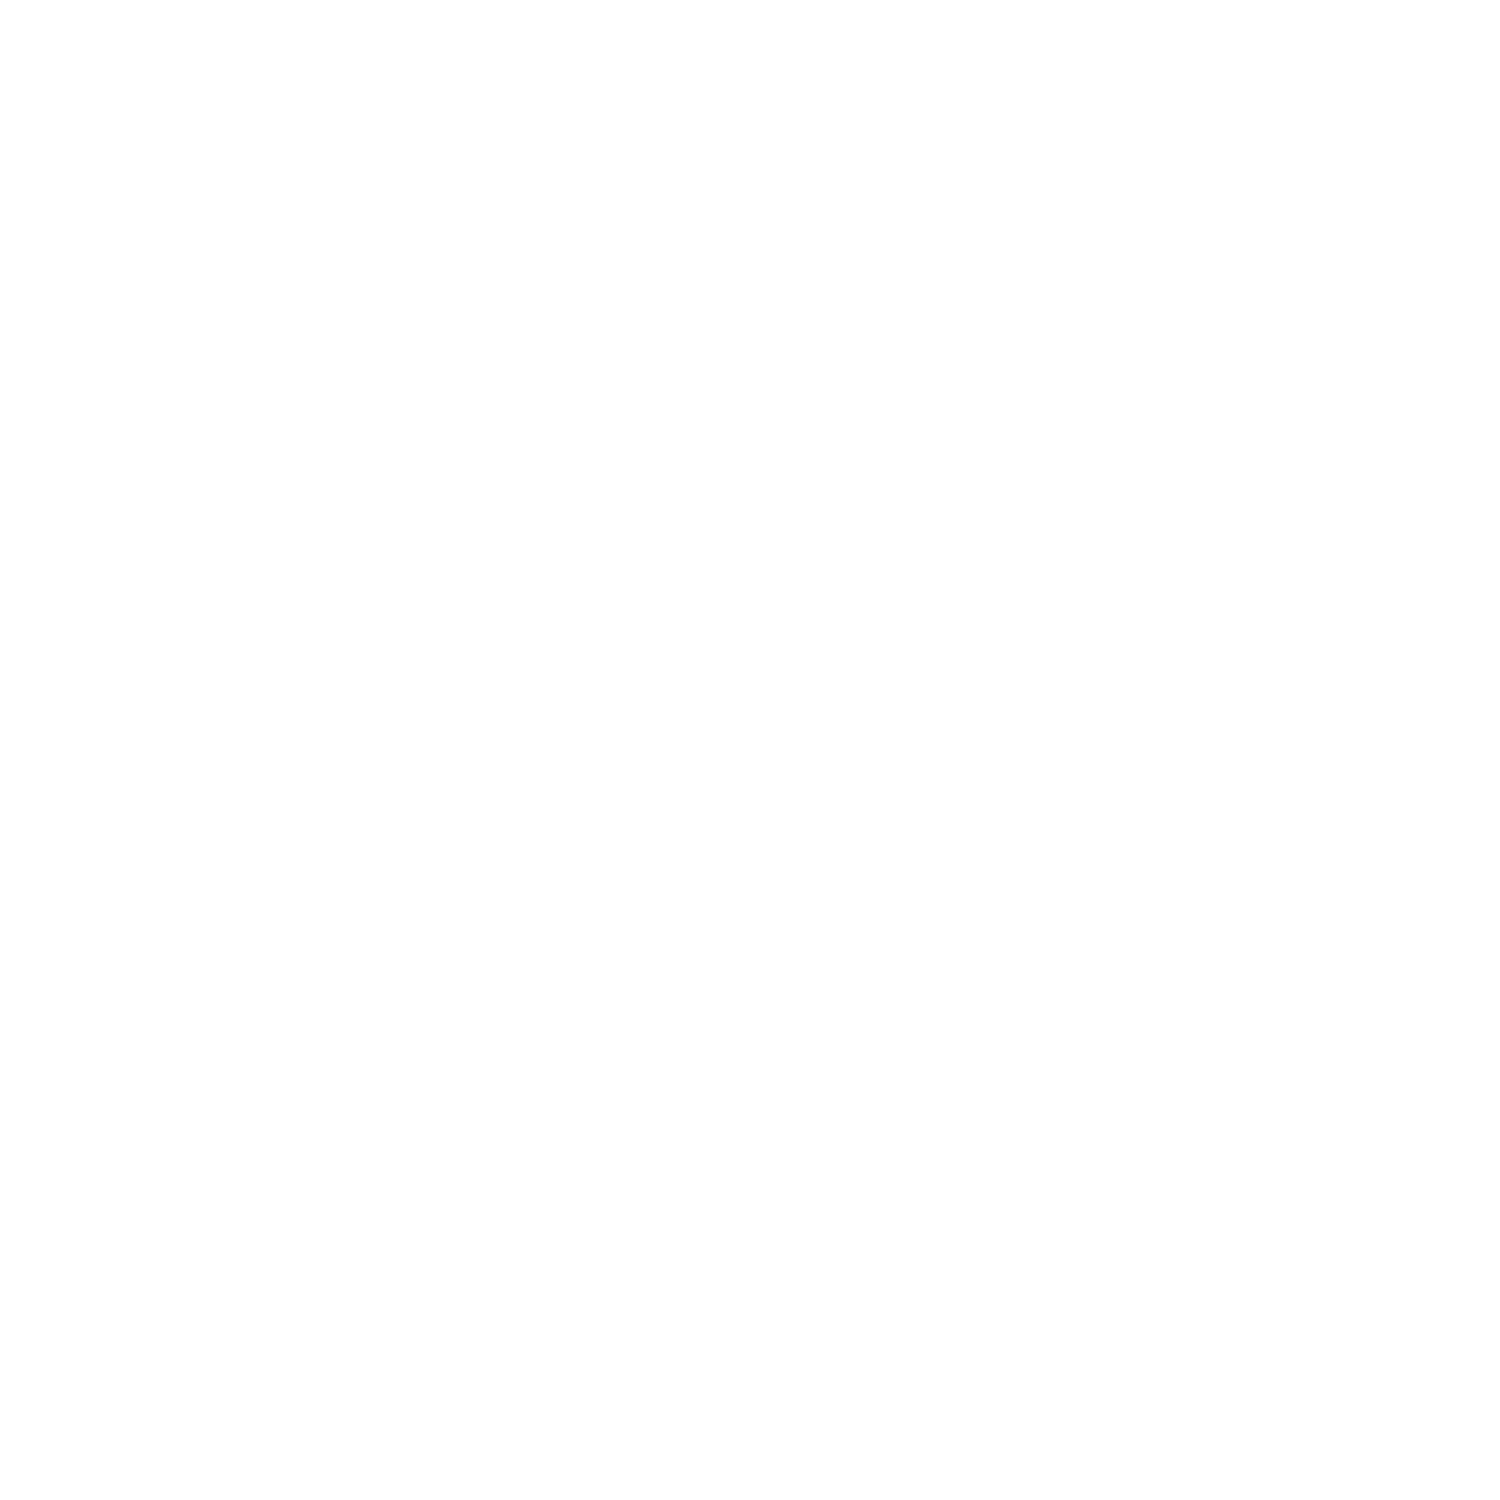 Travel House Collective